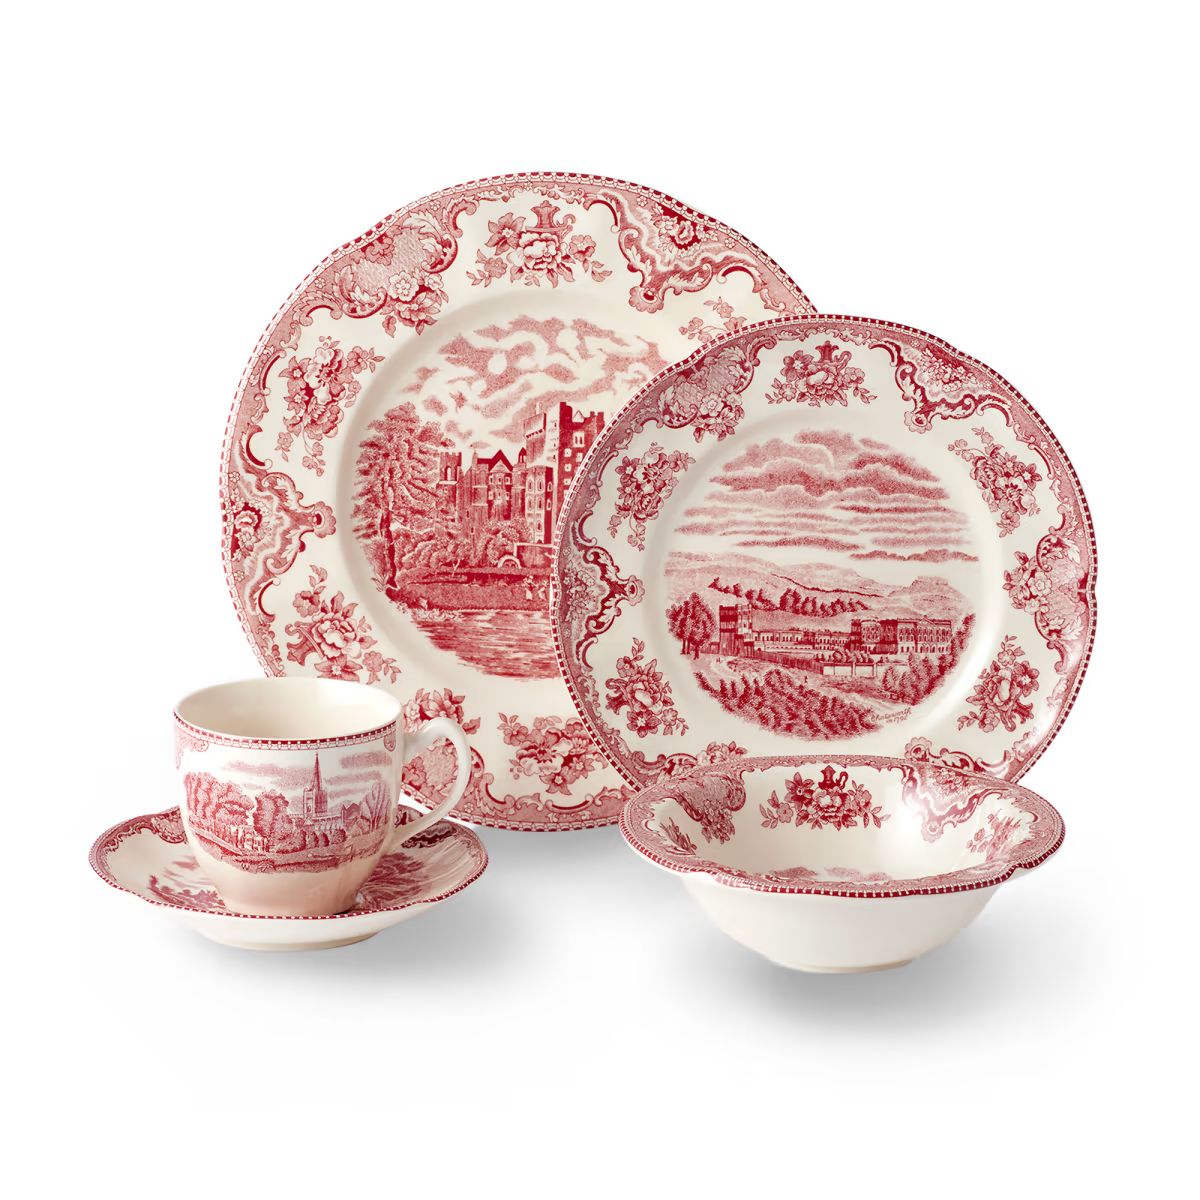 20-pc. Service for 4 - Johnson Brothers "Old Britain Castles Pink" Earthenware Dinnerware | Ross-Simons